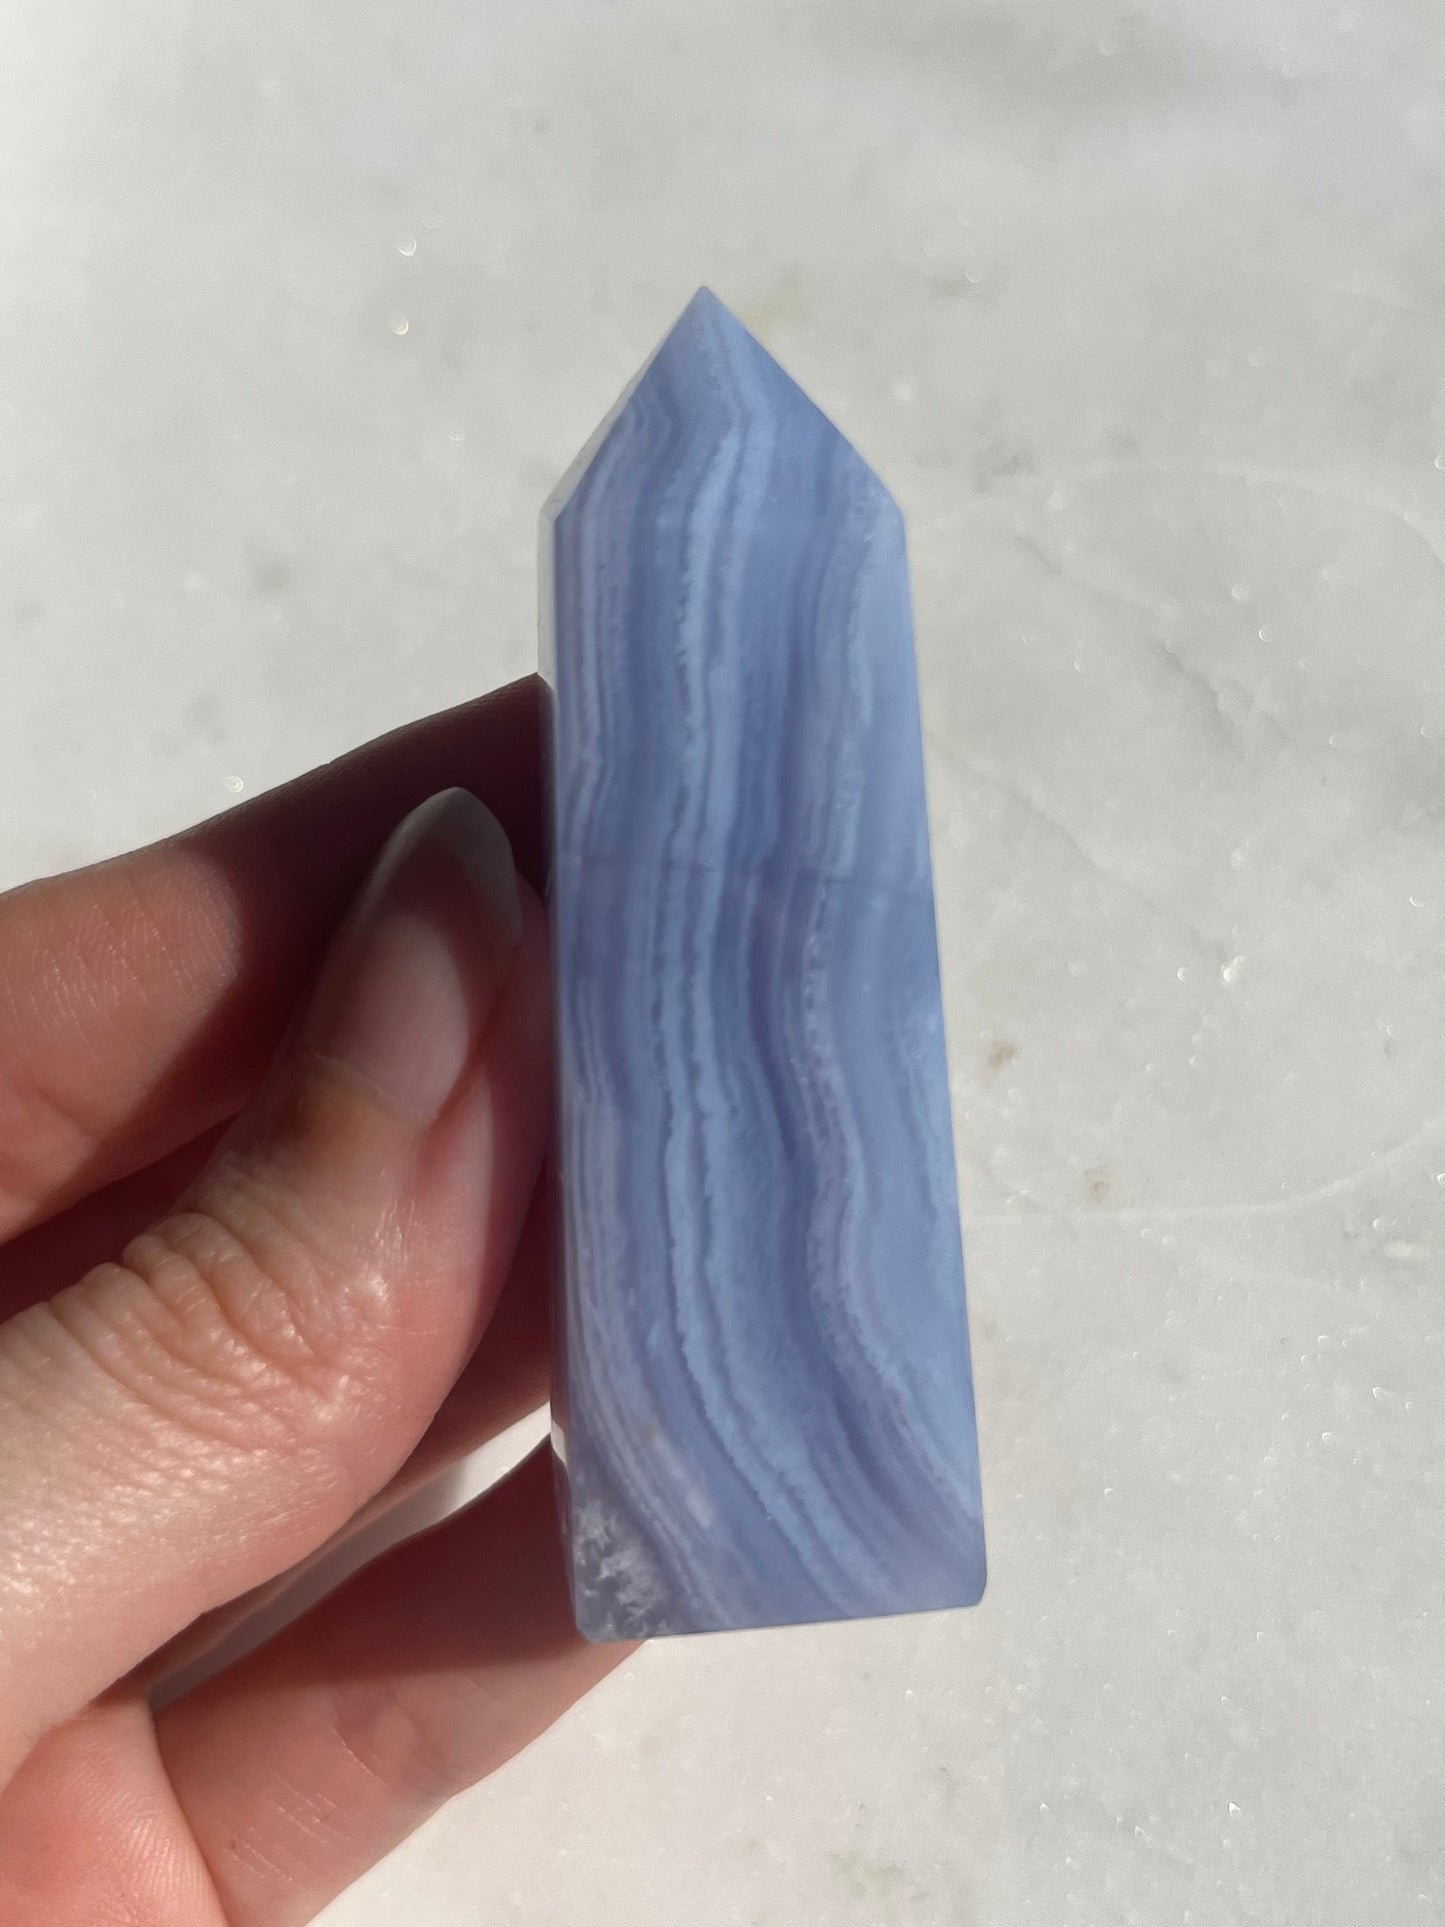 High Grade Blue Lace Agate Tower w/ White Dendritic Inclusions #6 (Perfectly Imperfect)